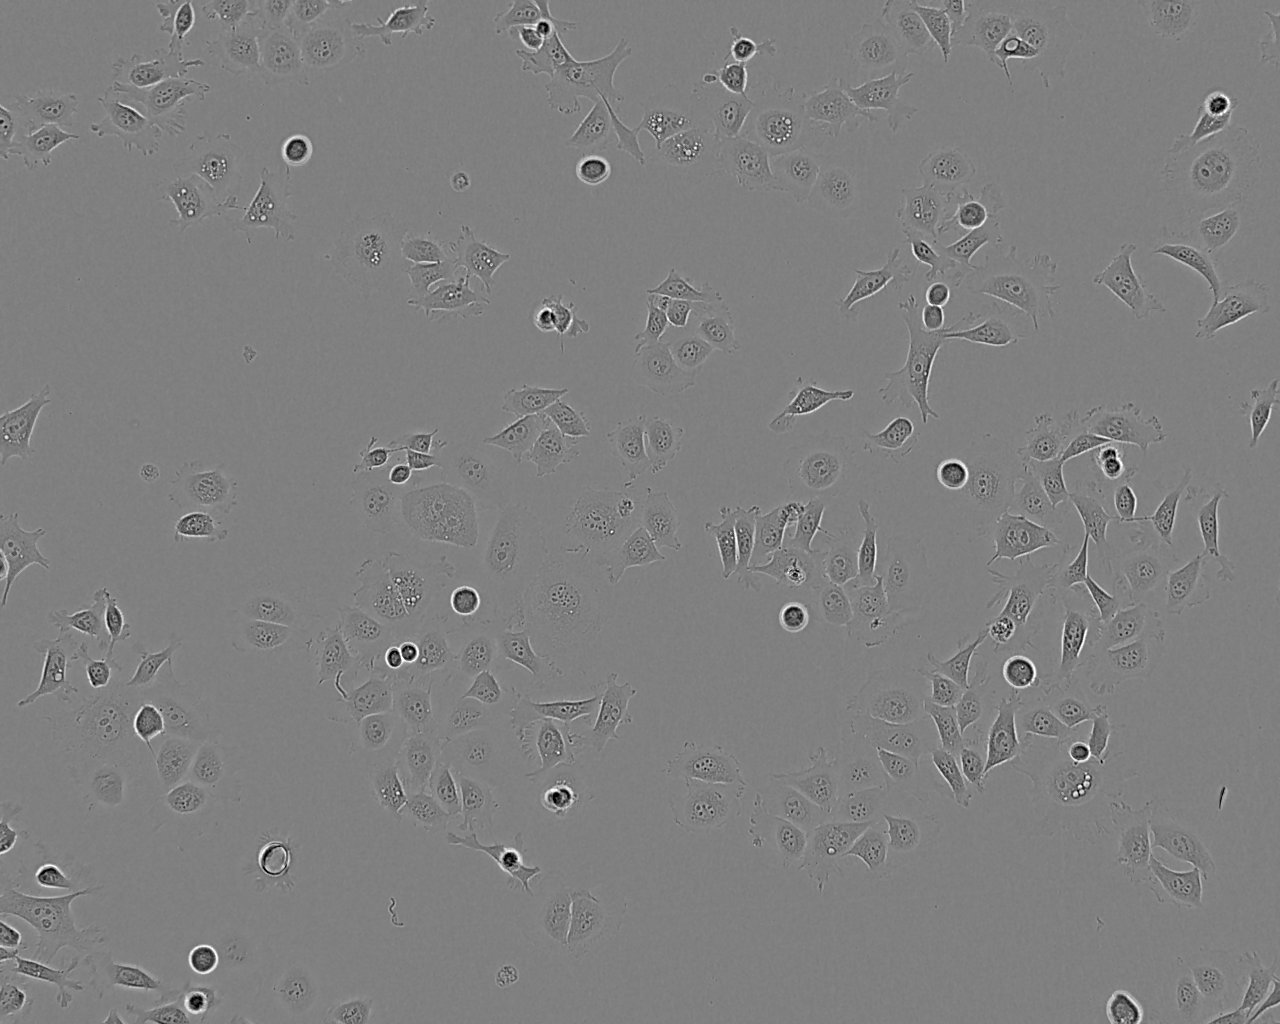 MDA-MB-435S epithelioid cells人乳腺导管癌细胞系,MDA-MB-435S epithelioid cells